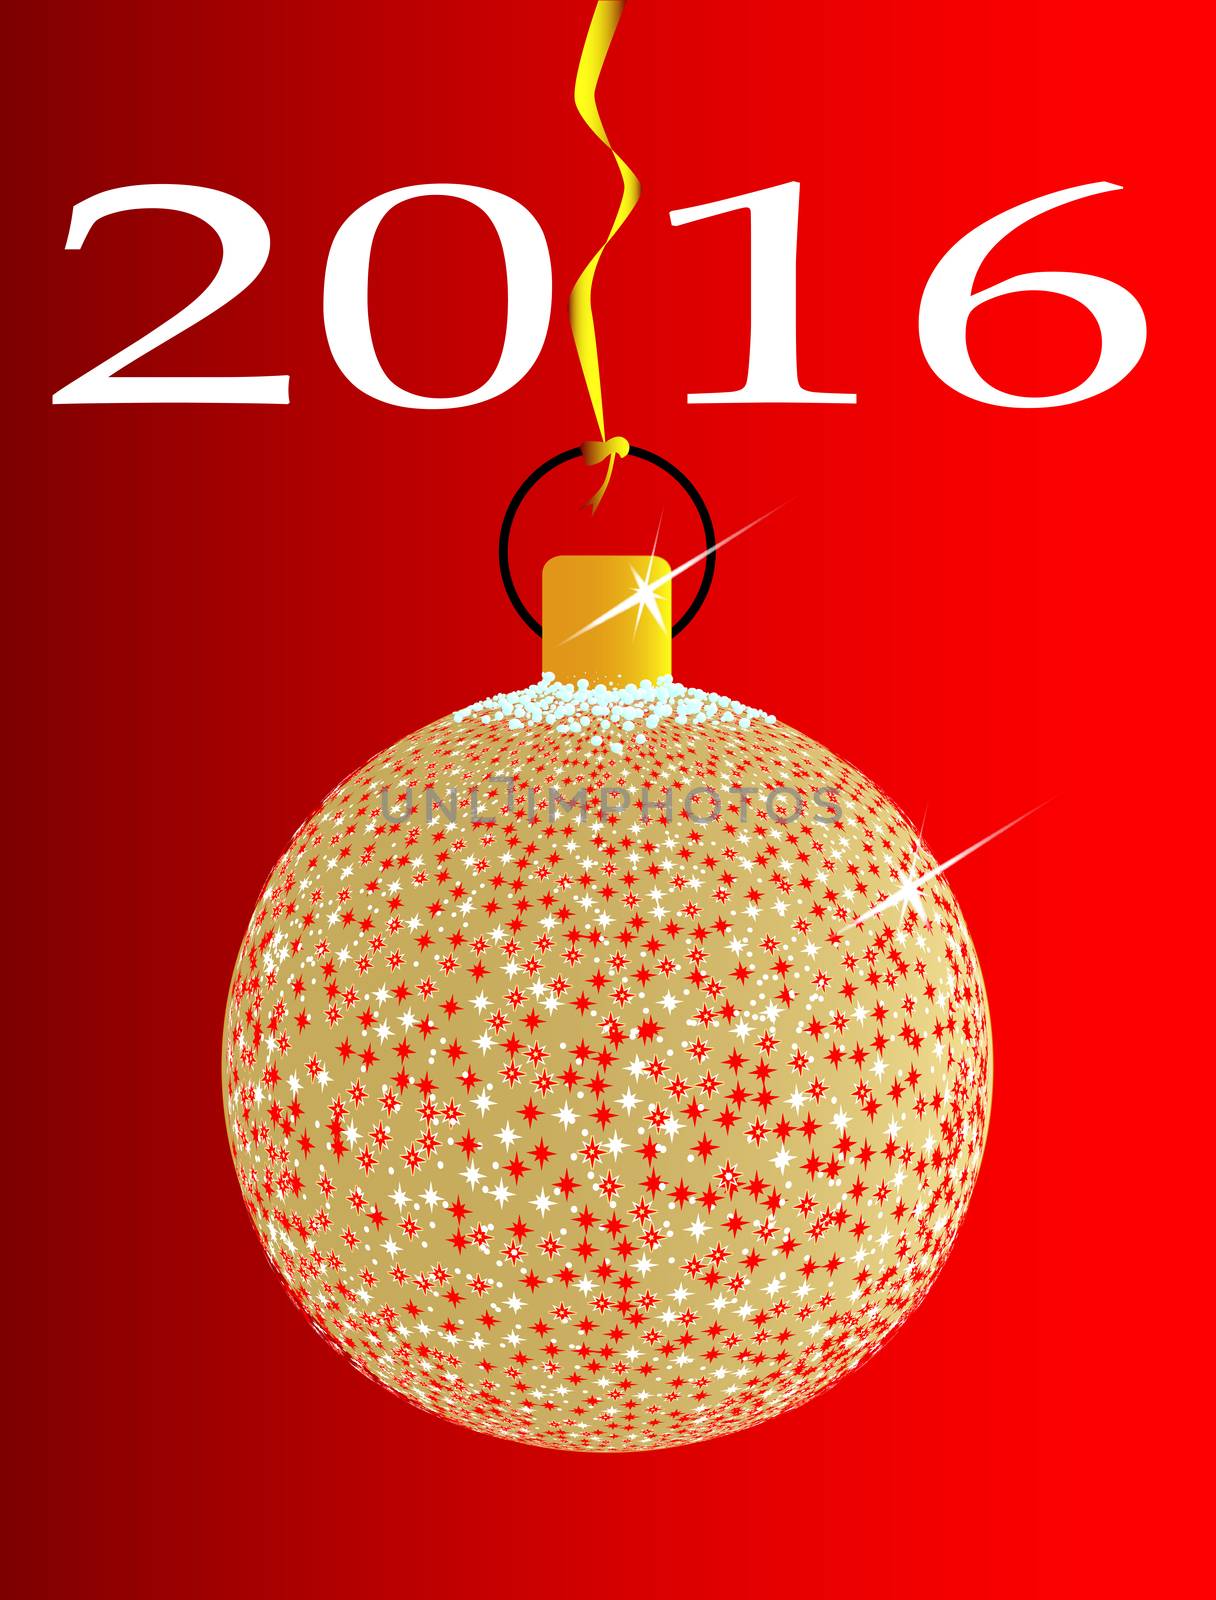 A gold and spakly Christmas tree ball decoration for 2016